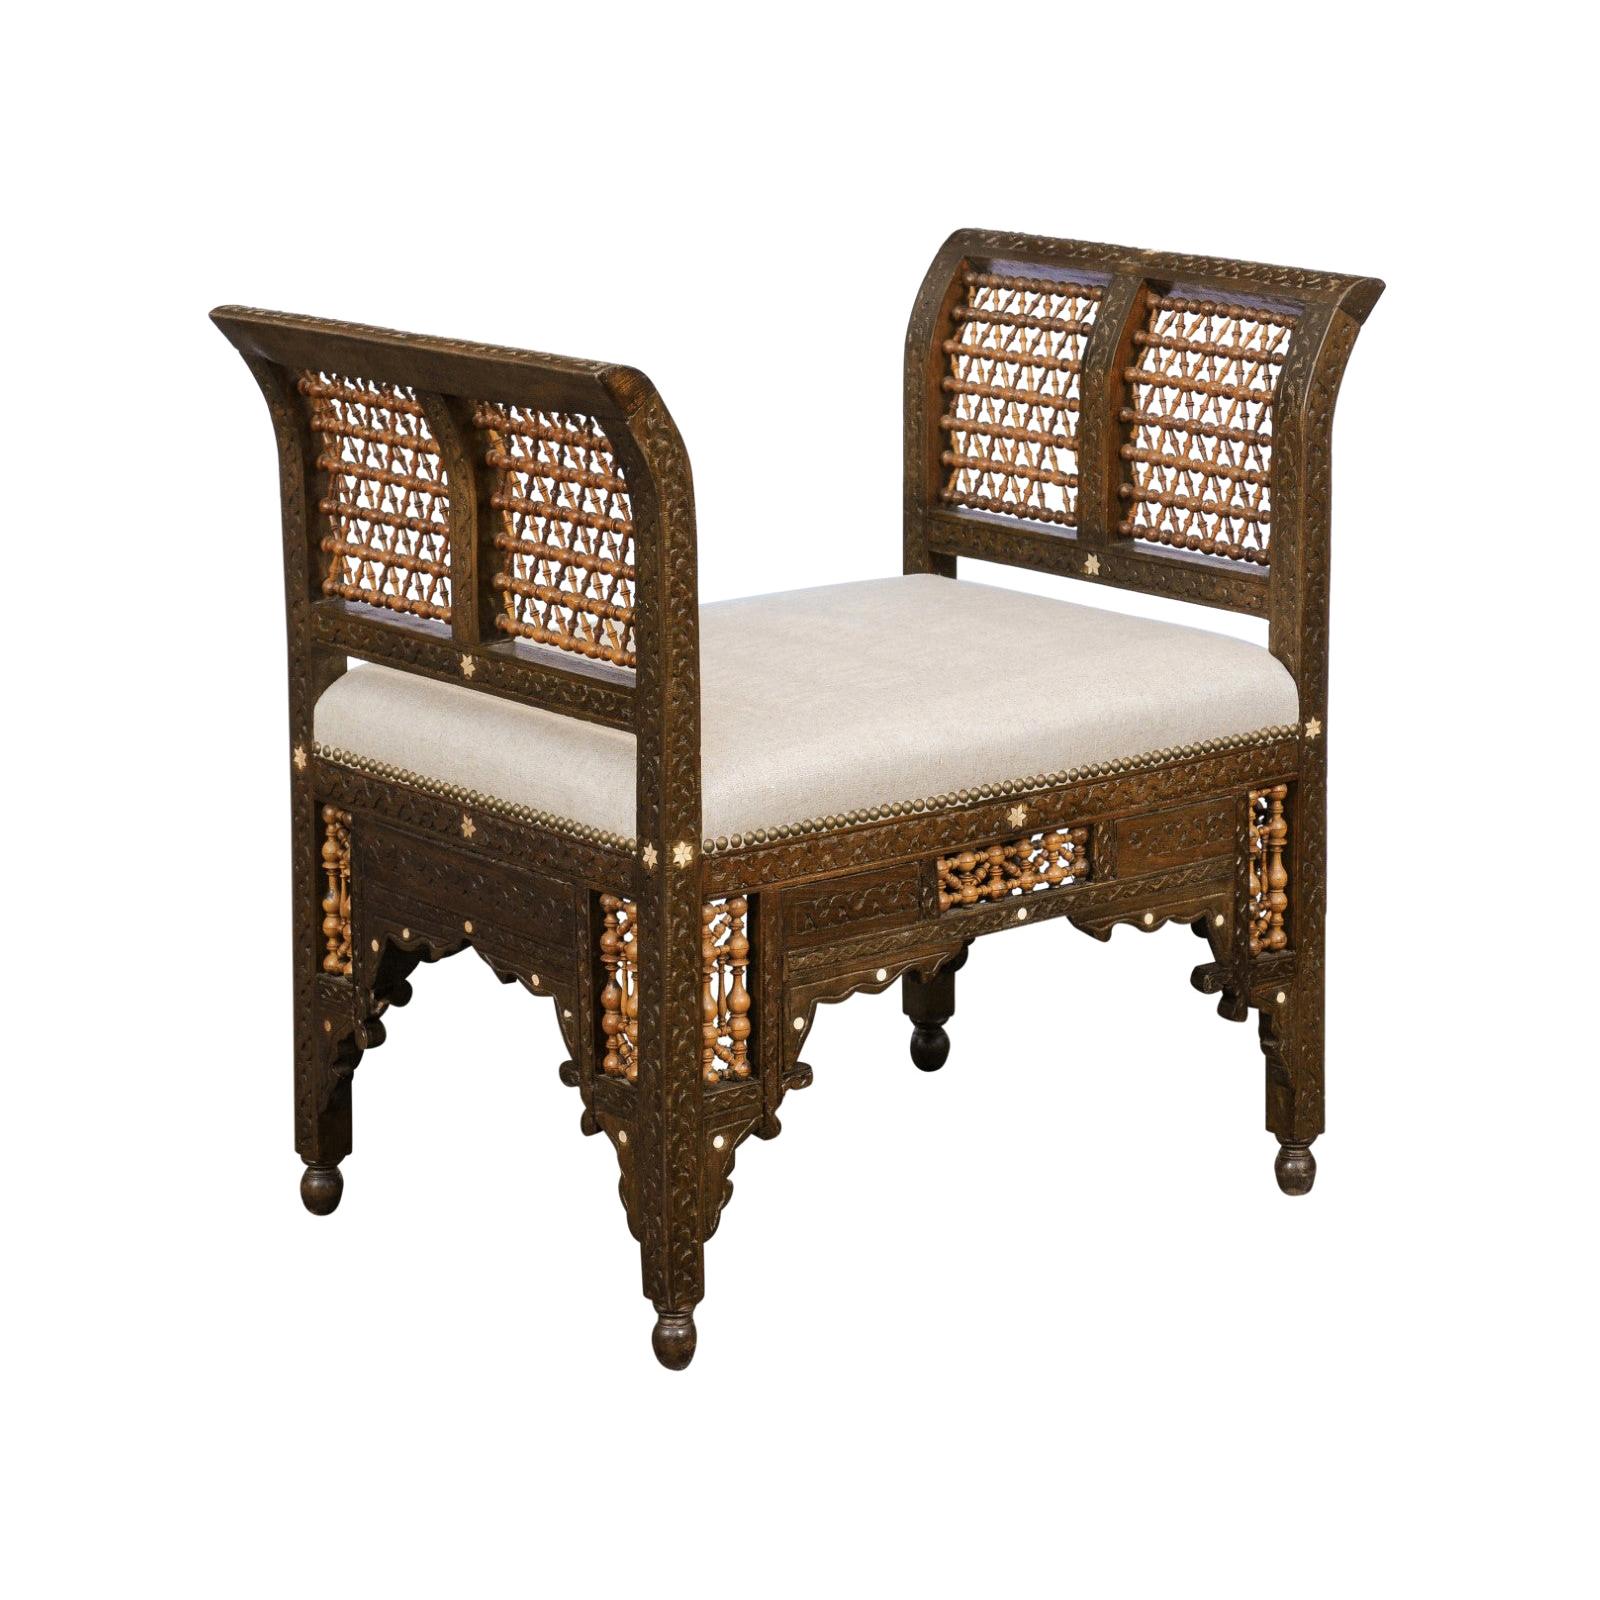 Moroccan 1900s Carved Two-Toned Wooden Upholstered Bench with Out-Scrolling Arms